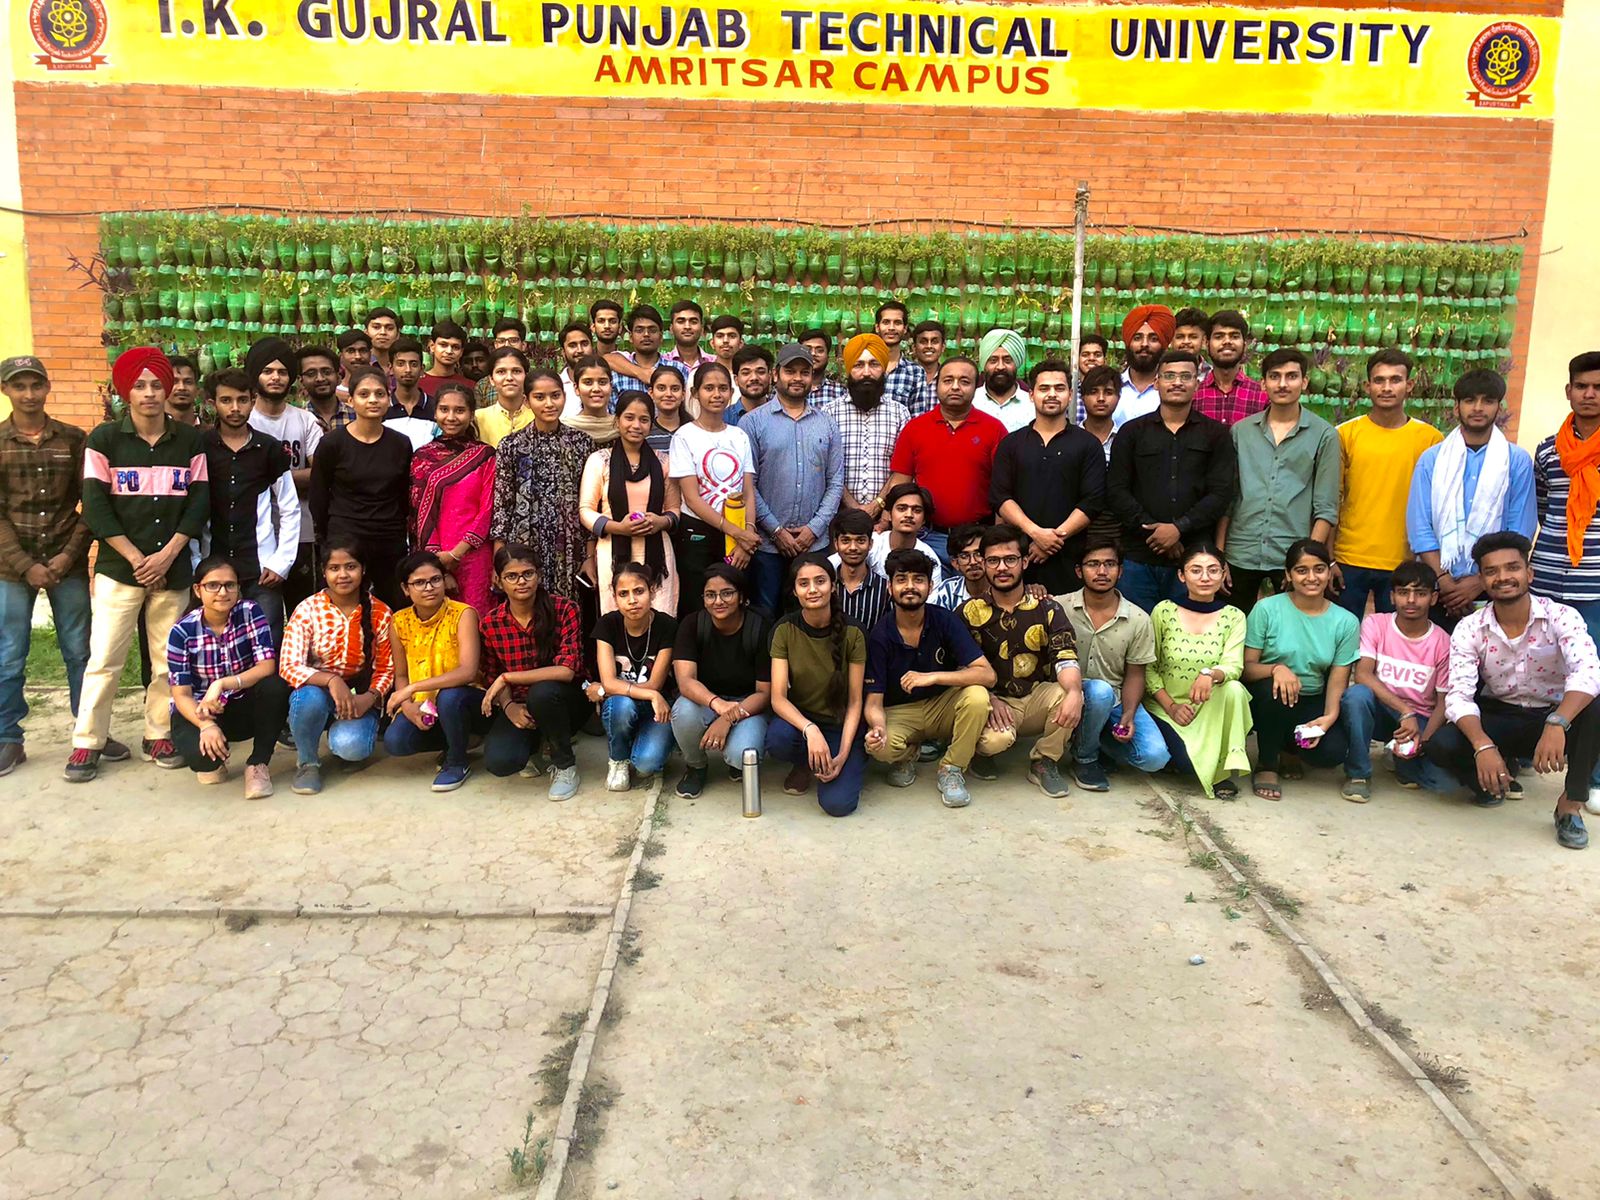 A Green Campus Initiative was organized by NSS Unit IKGPTU Amritsar Campus under the Banner 